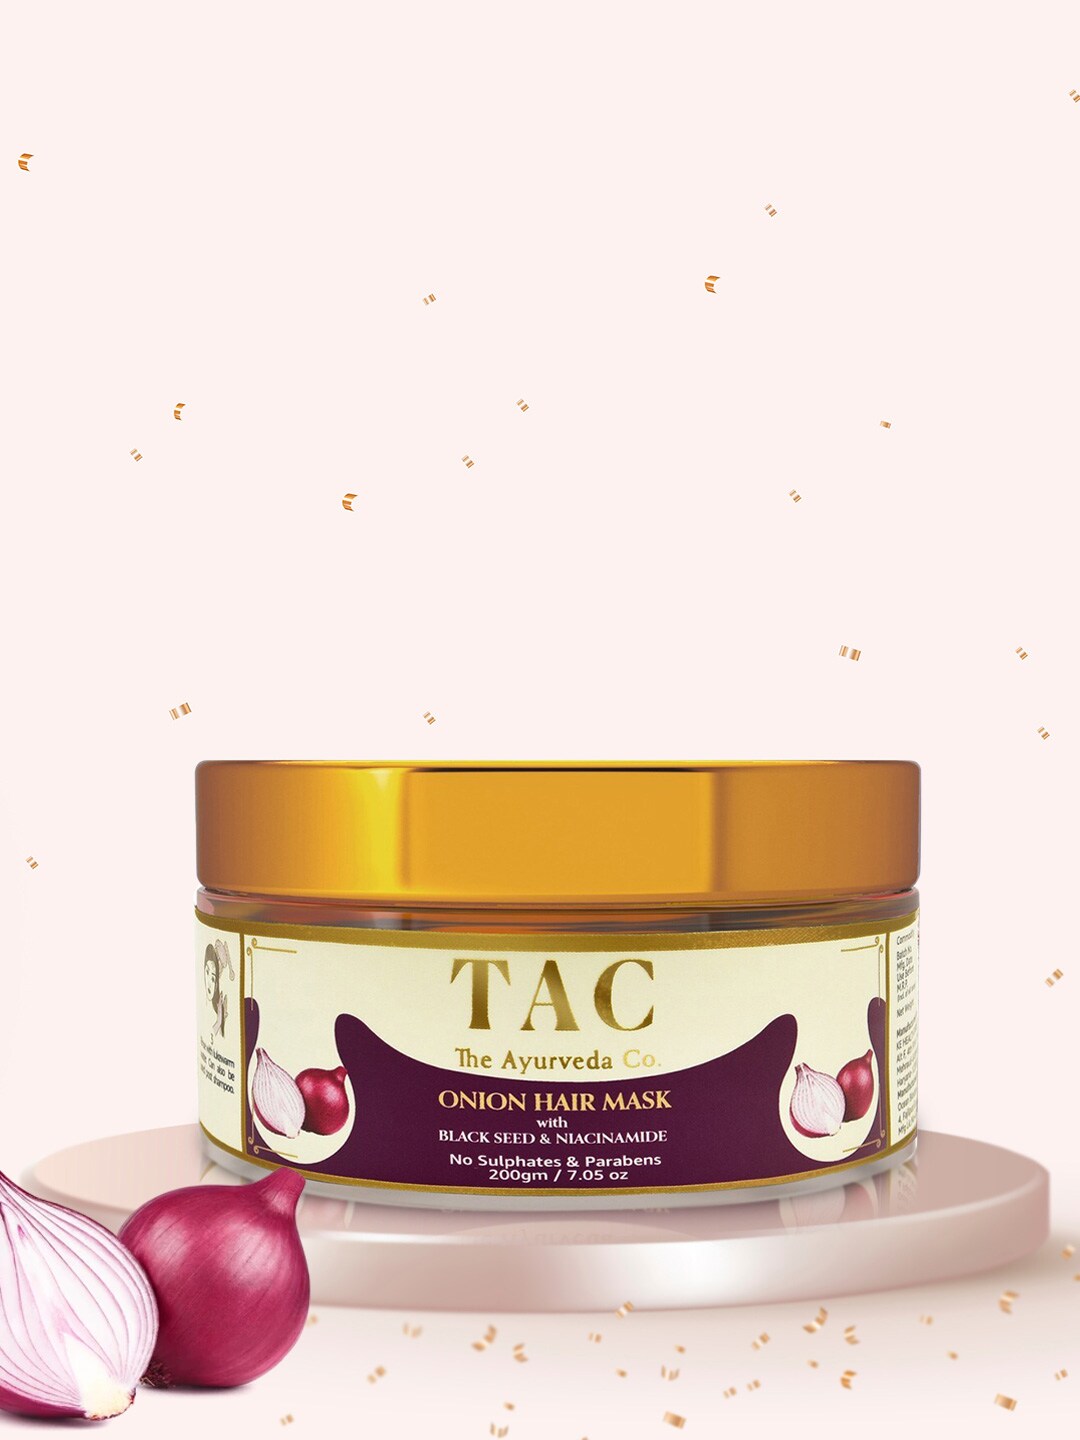 TAC - The Ayurveda Co. Onion HairFall Control Black Seed Oil & Niacinamide Hair Mask-200gm Price in India